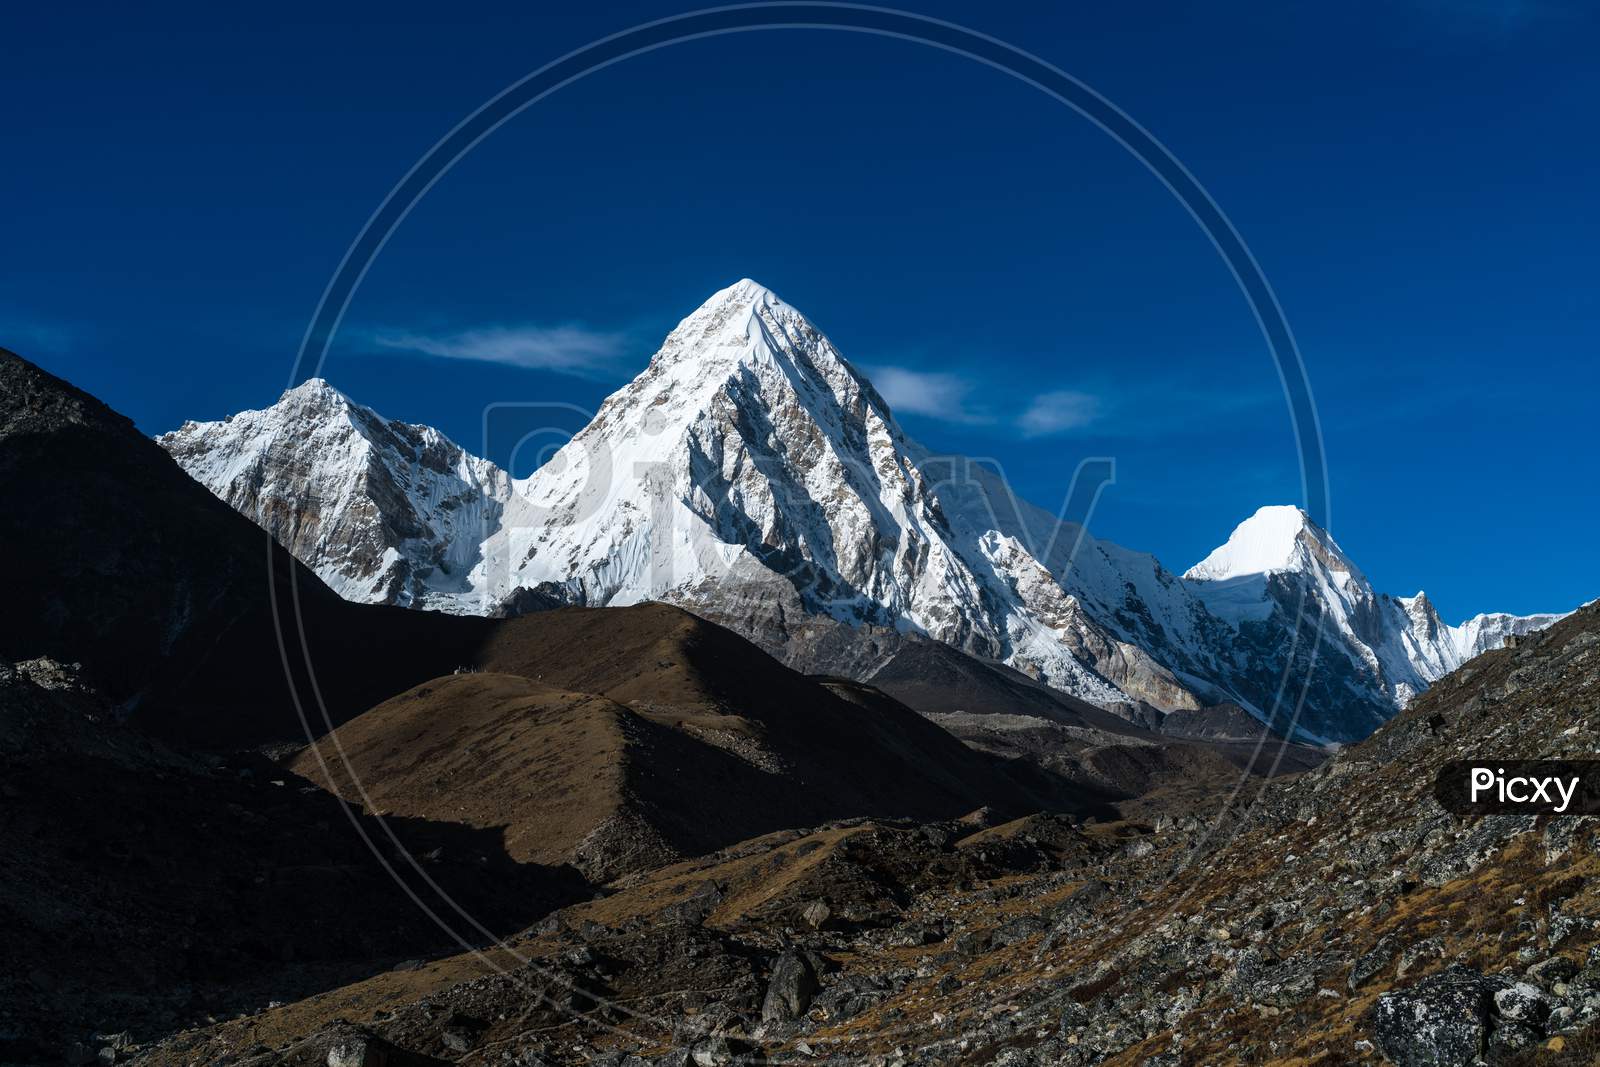 Pumori and high mountain scenery during Everest Base Camp Trek